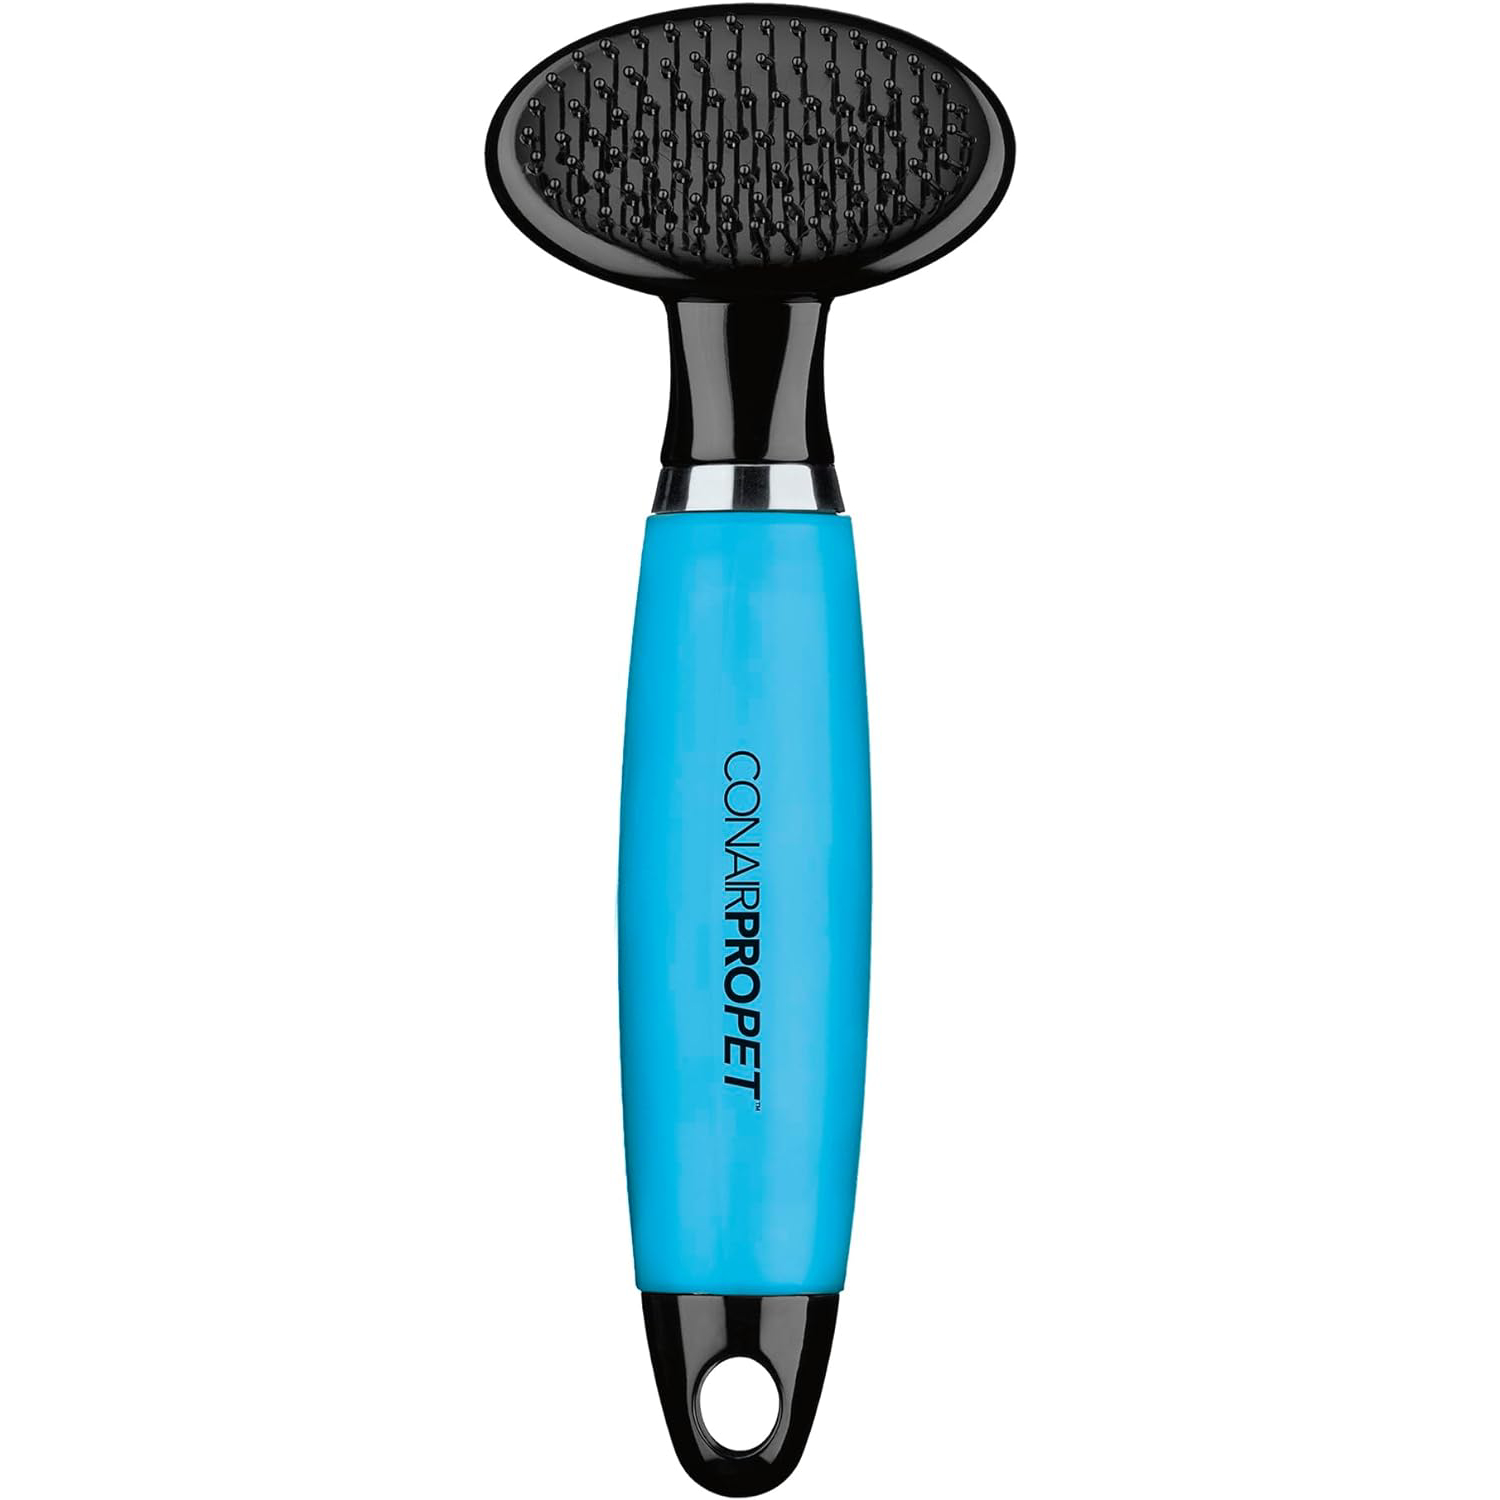 CONAIRPRO Dog & Cat Cat Soft Slicker Brush, Cat Brush for Shedding, Removes Tangles, Mats & Loose Hair, Soft Coated Pins for Gentle Brushing, Memory Gel Grip Handle,Blue new